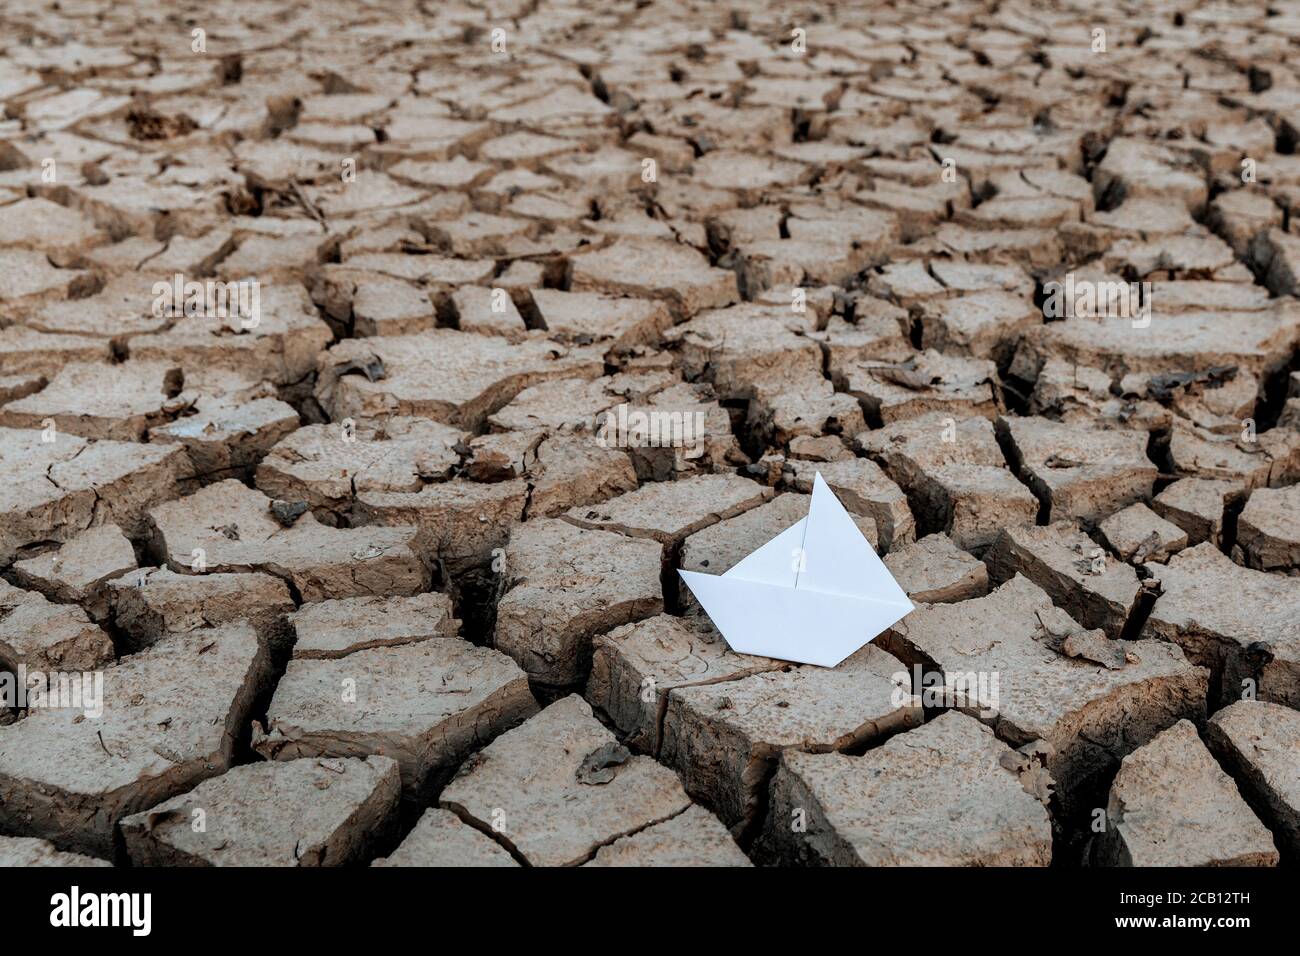 White paper boat on dry, dry soil with cracks. Global warming concept. Stock Photo